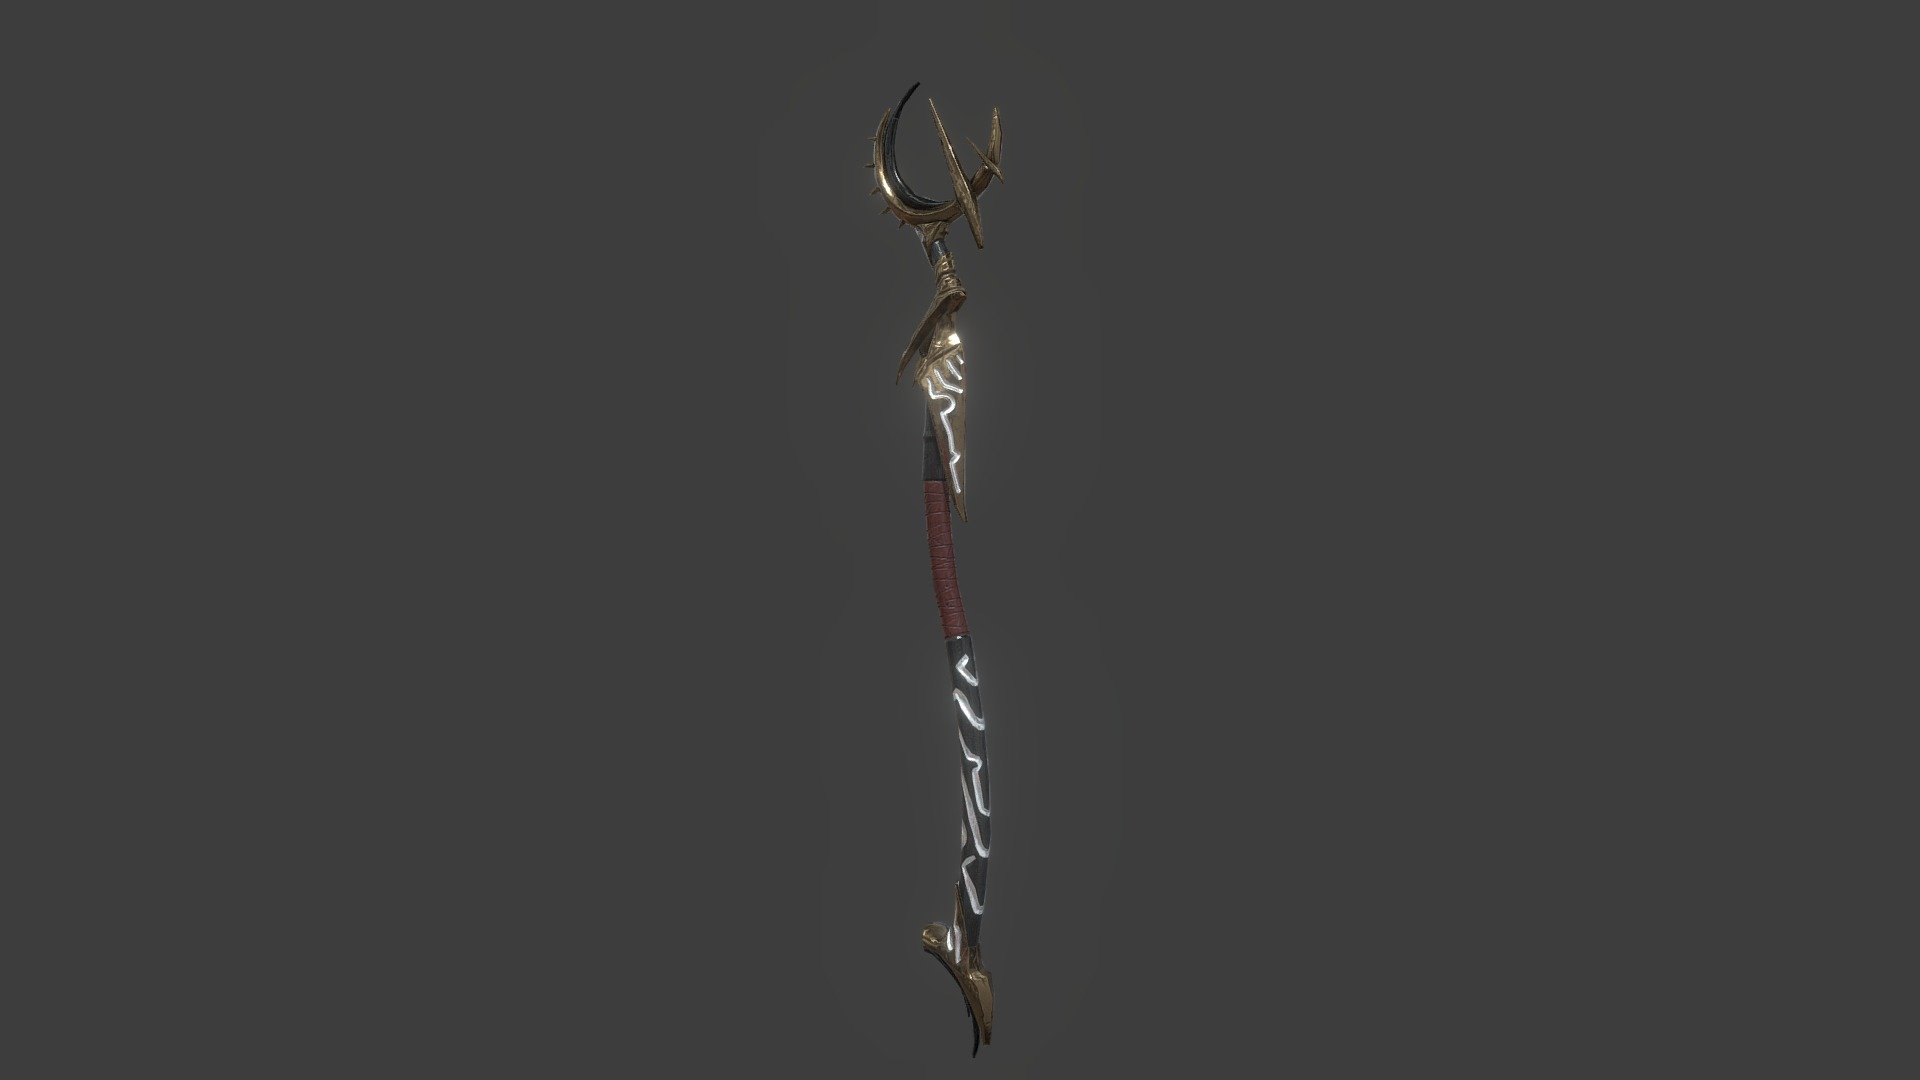 Staff based on a Roman Guro's concept art. 

Software used: Blender, Zbrush, Substance Painter.

Link to Roman Guro's art: https://www.artstation.com/artwork/lRVga - Crescent Moon Staff - Download Free 3D model by magiccc 3d model